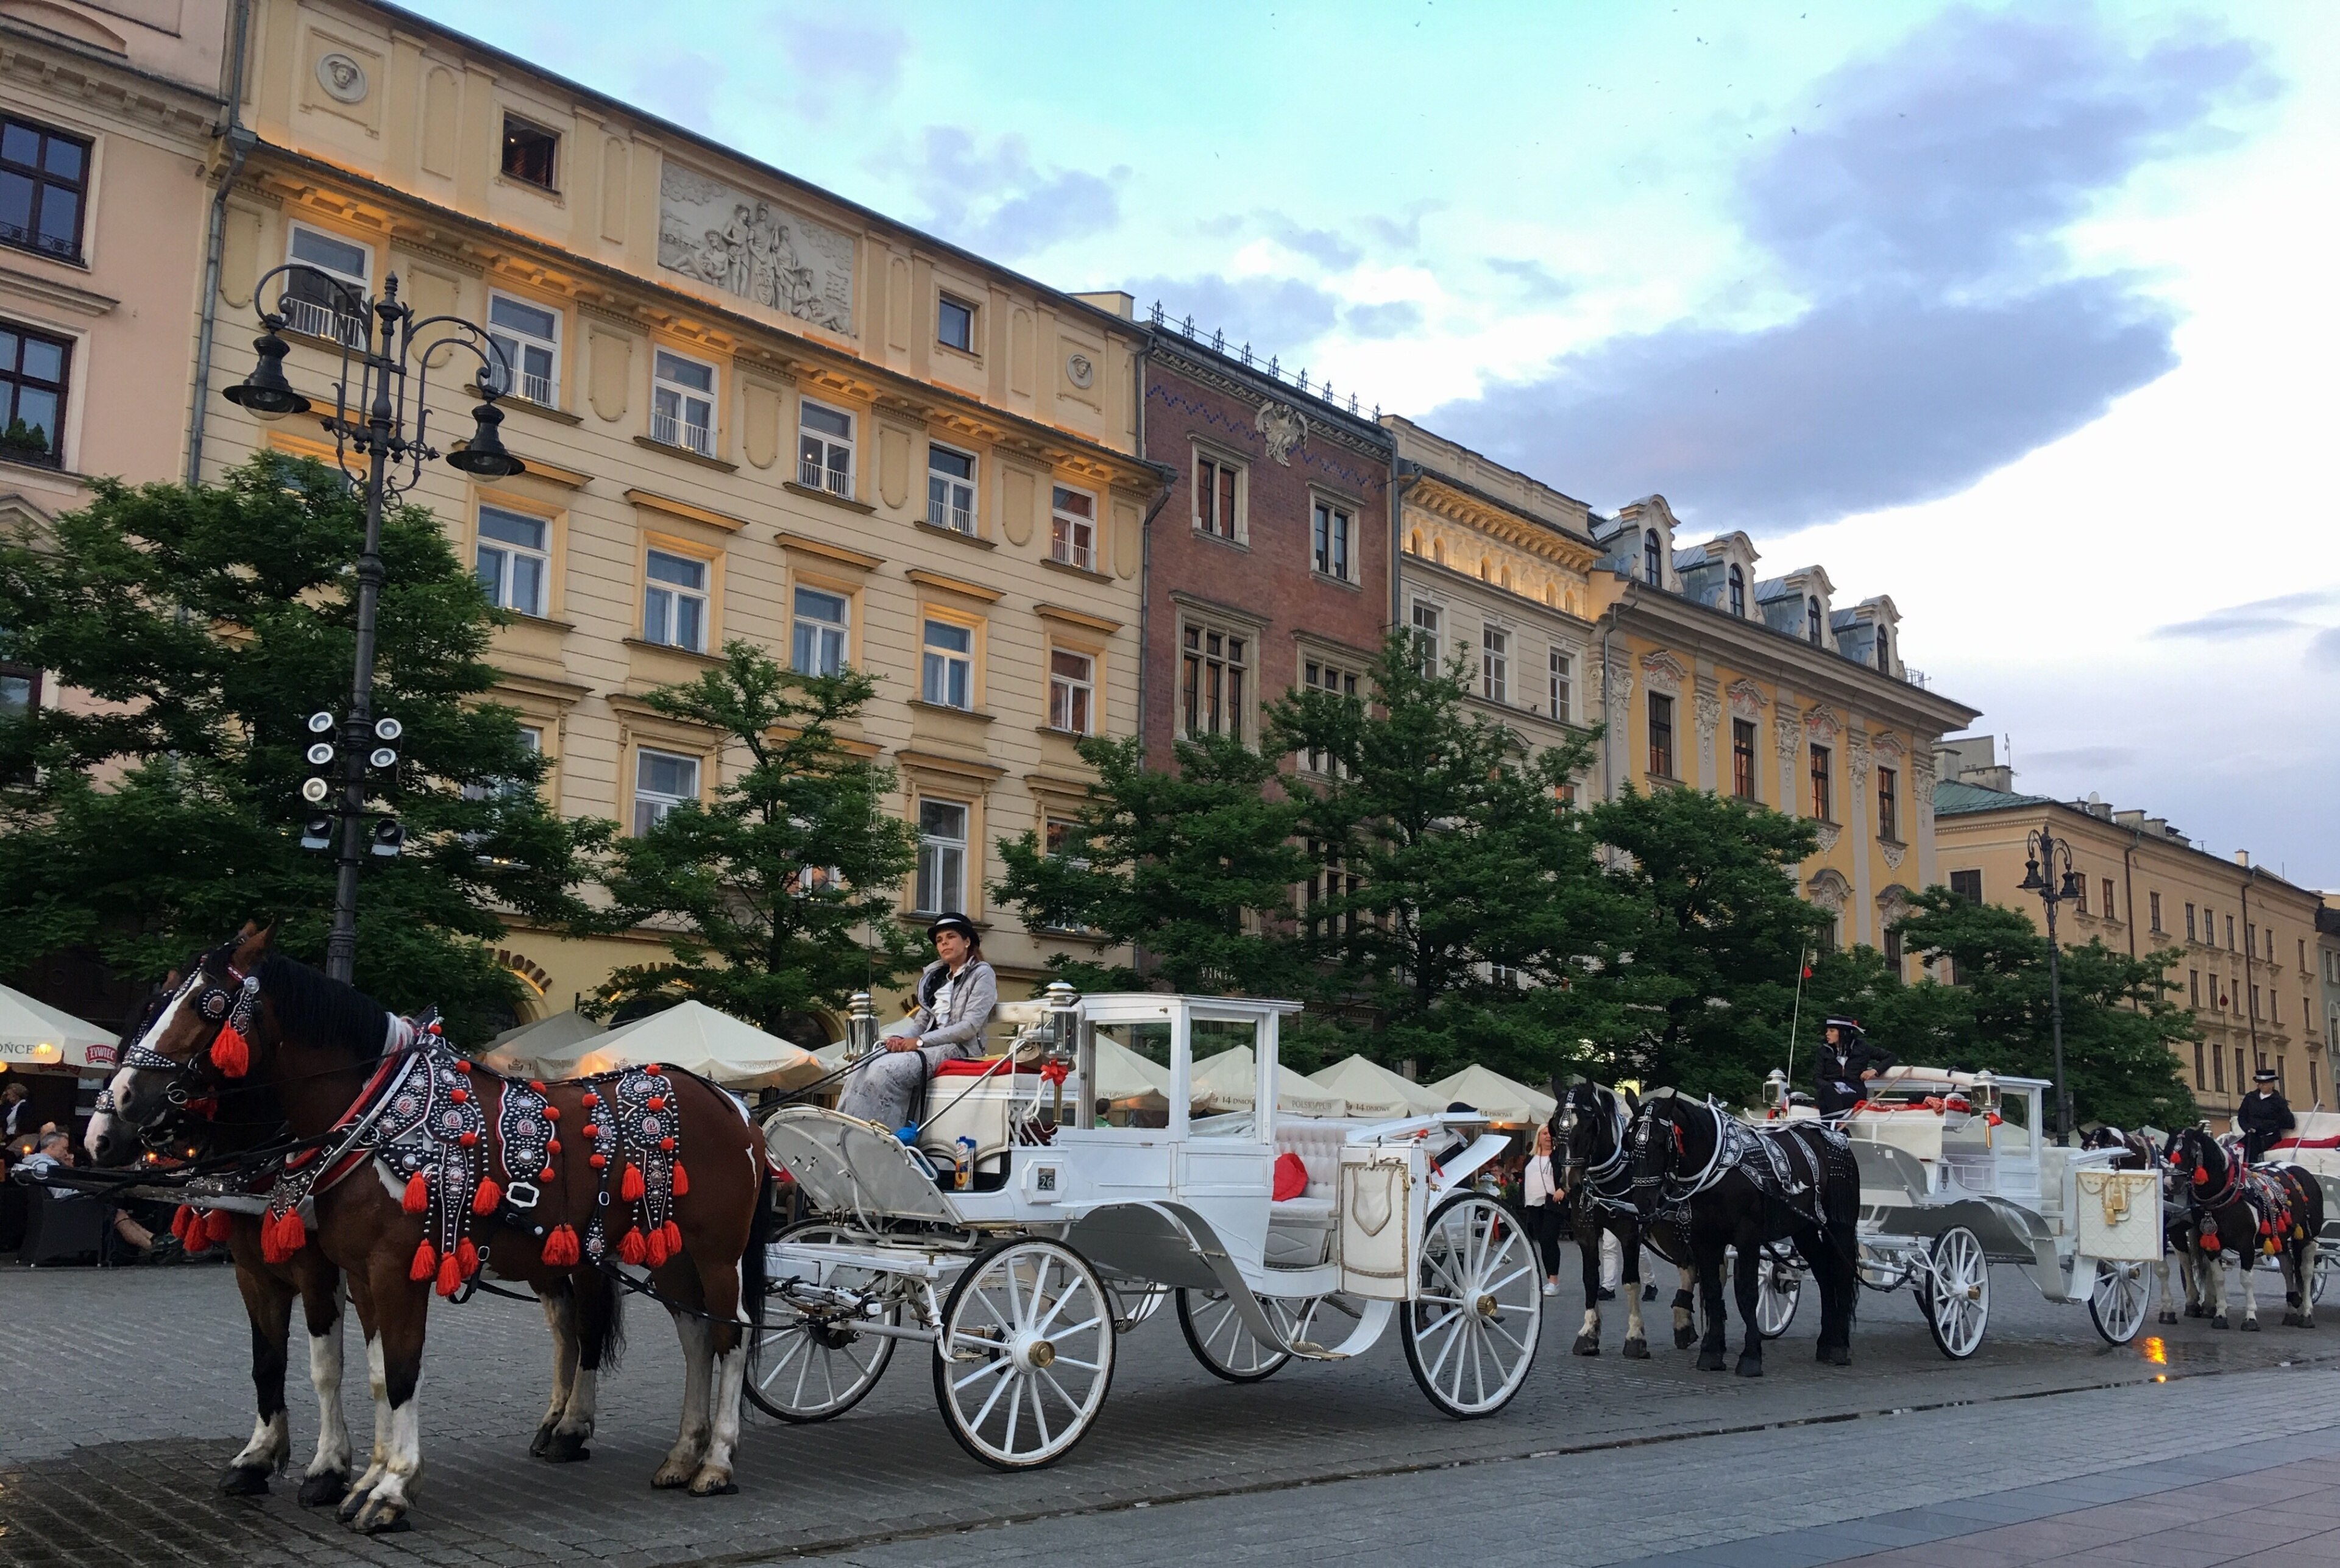 Carriage in old town Poland. A nice short trip with your loved ones. #culture